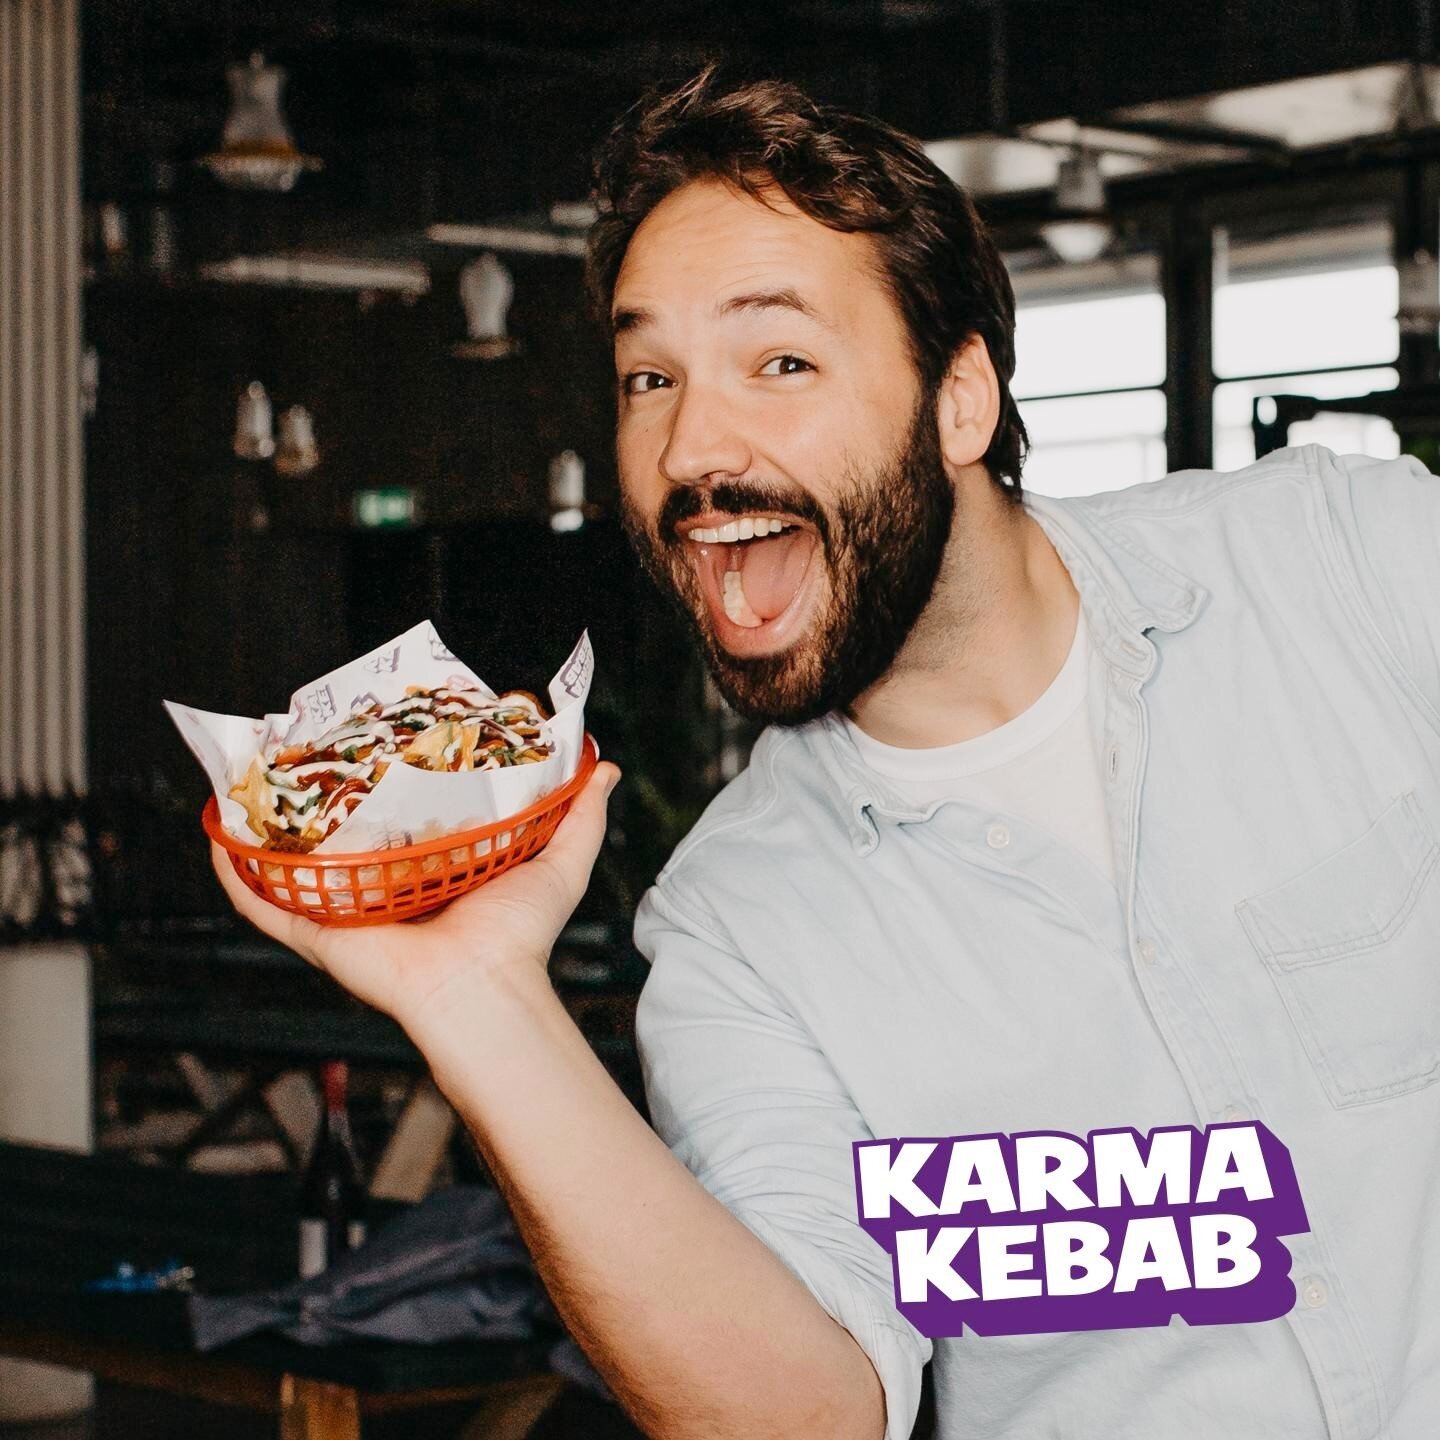 What do you think we just told this happy face?! Stay tuned for the best news of 2020 yet! 🥁 Something about supermarkets and kebab... 🤫 

#staytuned #tomorrow #karmakebab #supermarkt #bestnewsof2020